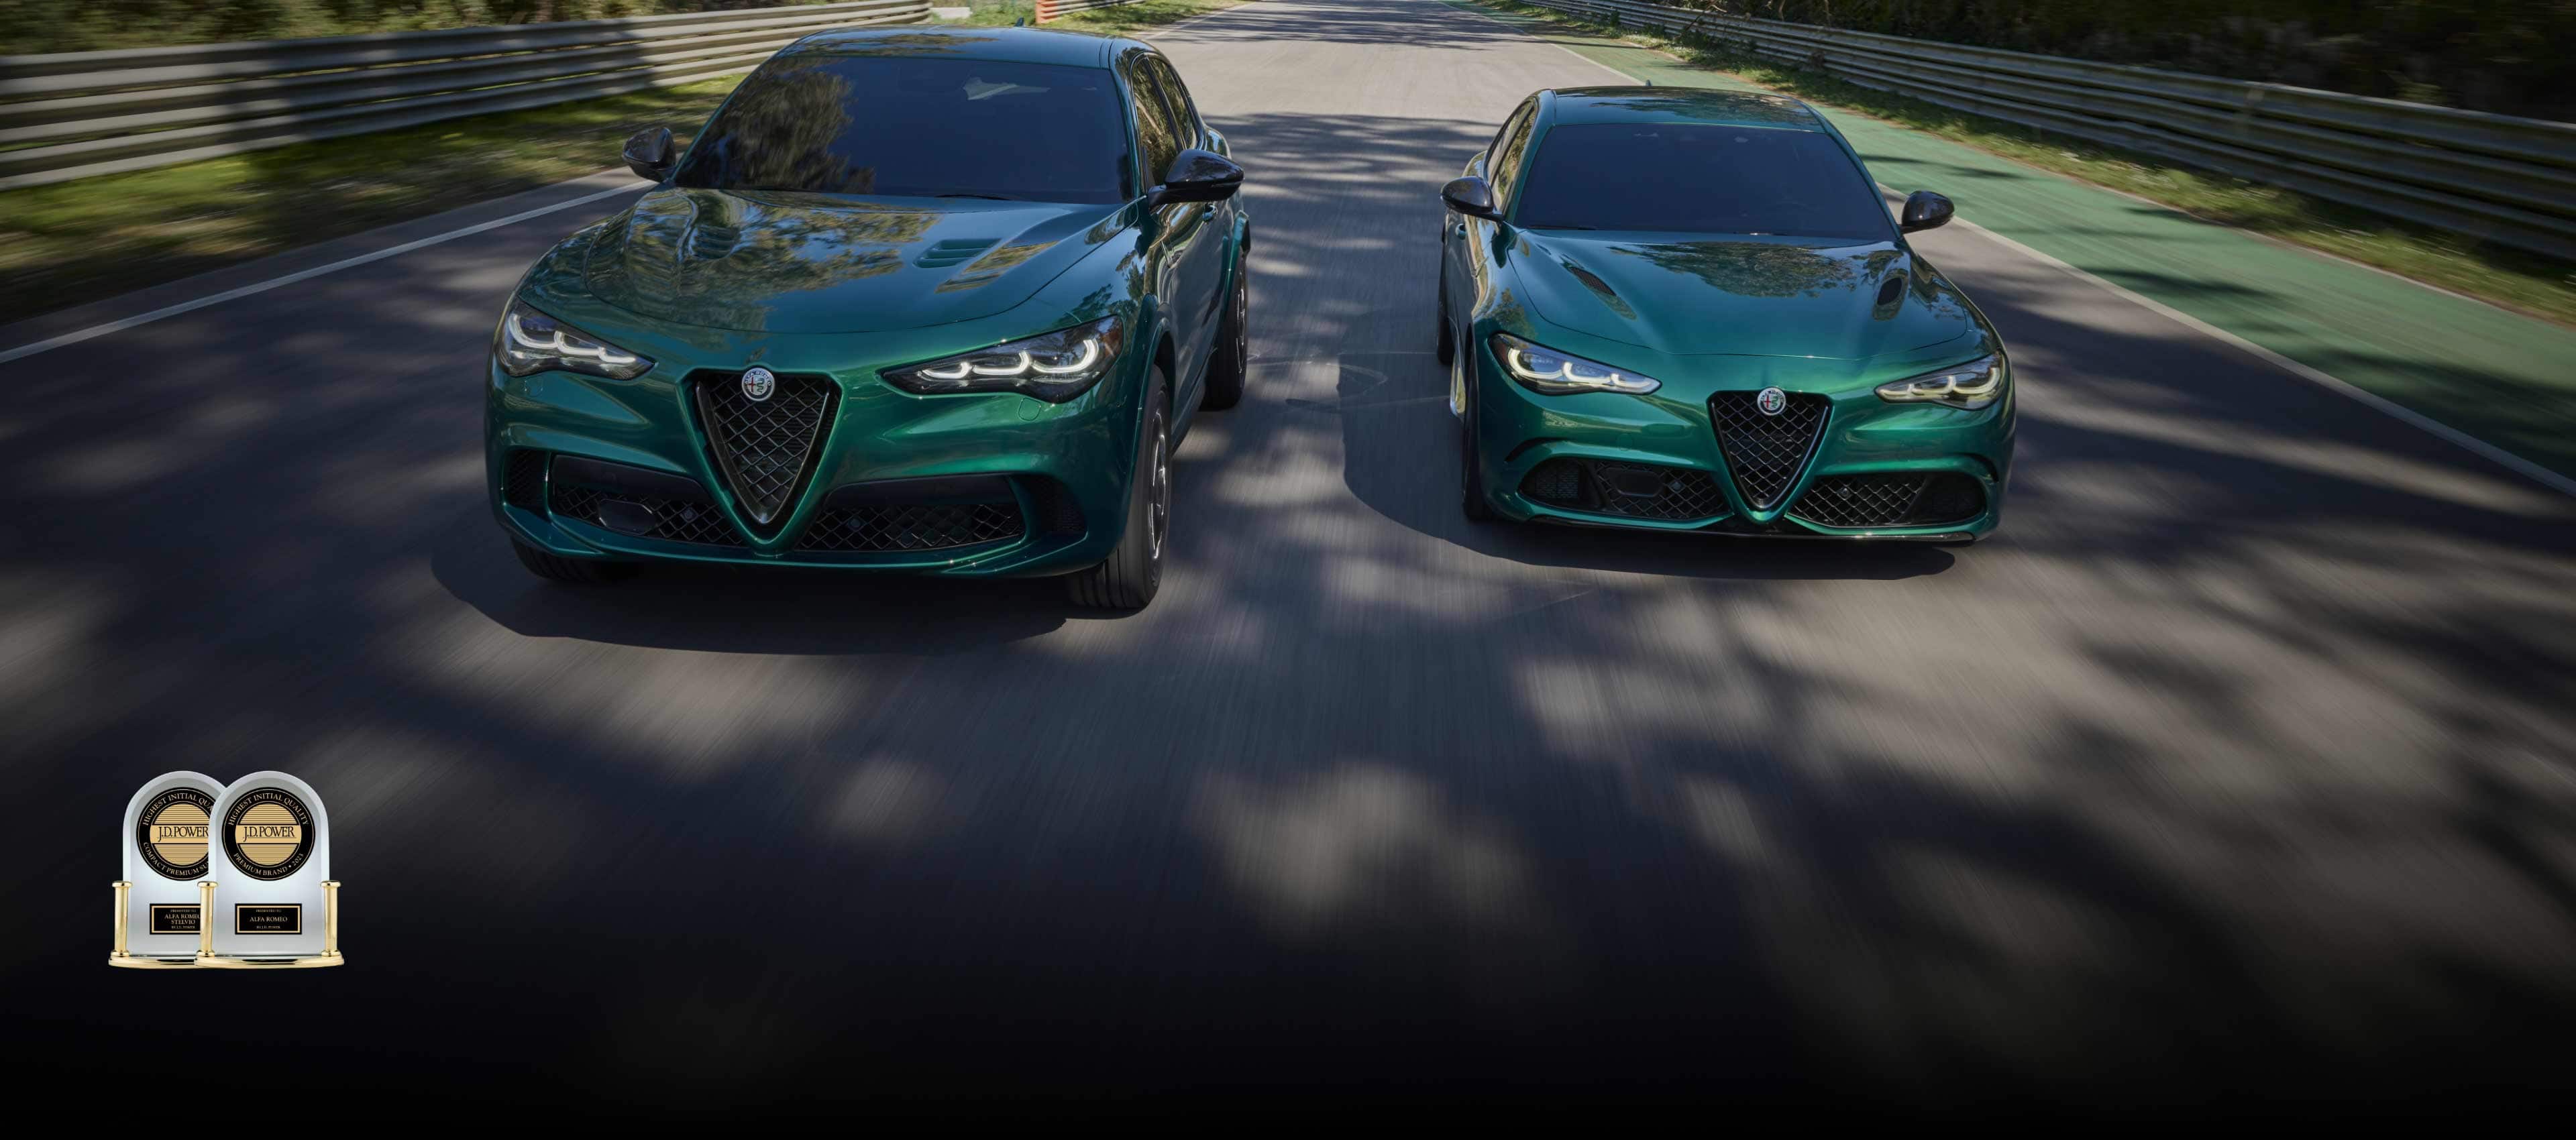 A green 2024 Alfa Romeo Stelvio Quadrifoglio on the left and a green 2024 Alfa Romeo Giulia Quadrifoglio on the right, being driven side-by-side. J.D. Power Highest Initial Quality Compact Premium SUV—2023 Presented to Alfa Romeo Stelvio by J.D. Power. J.D. Power Highest Initial Quality Premium Brand—2023 Presented to Alfa Romeo by J.D. Power.